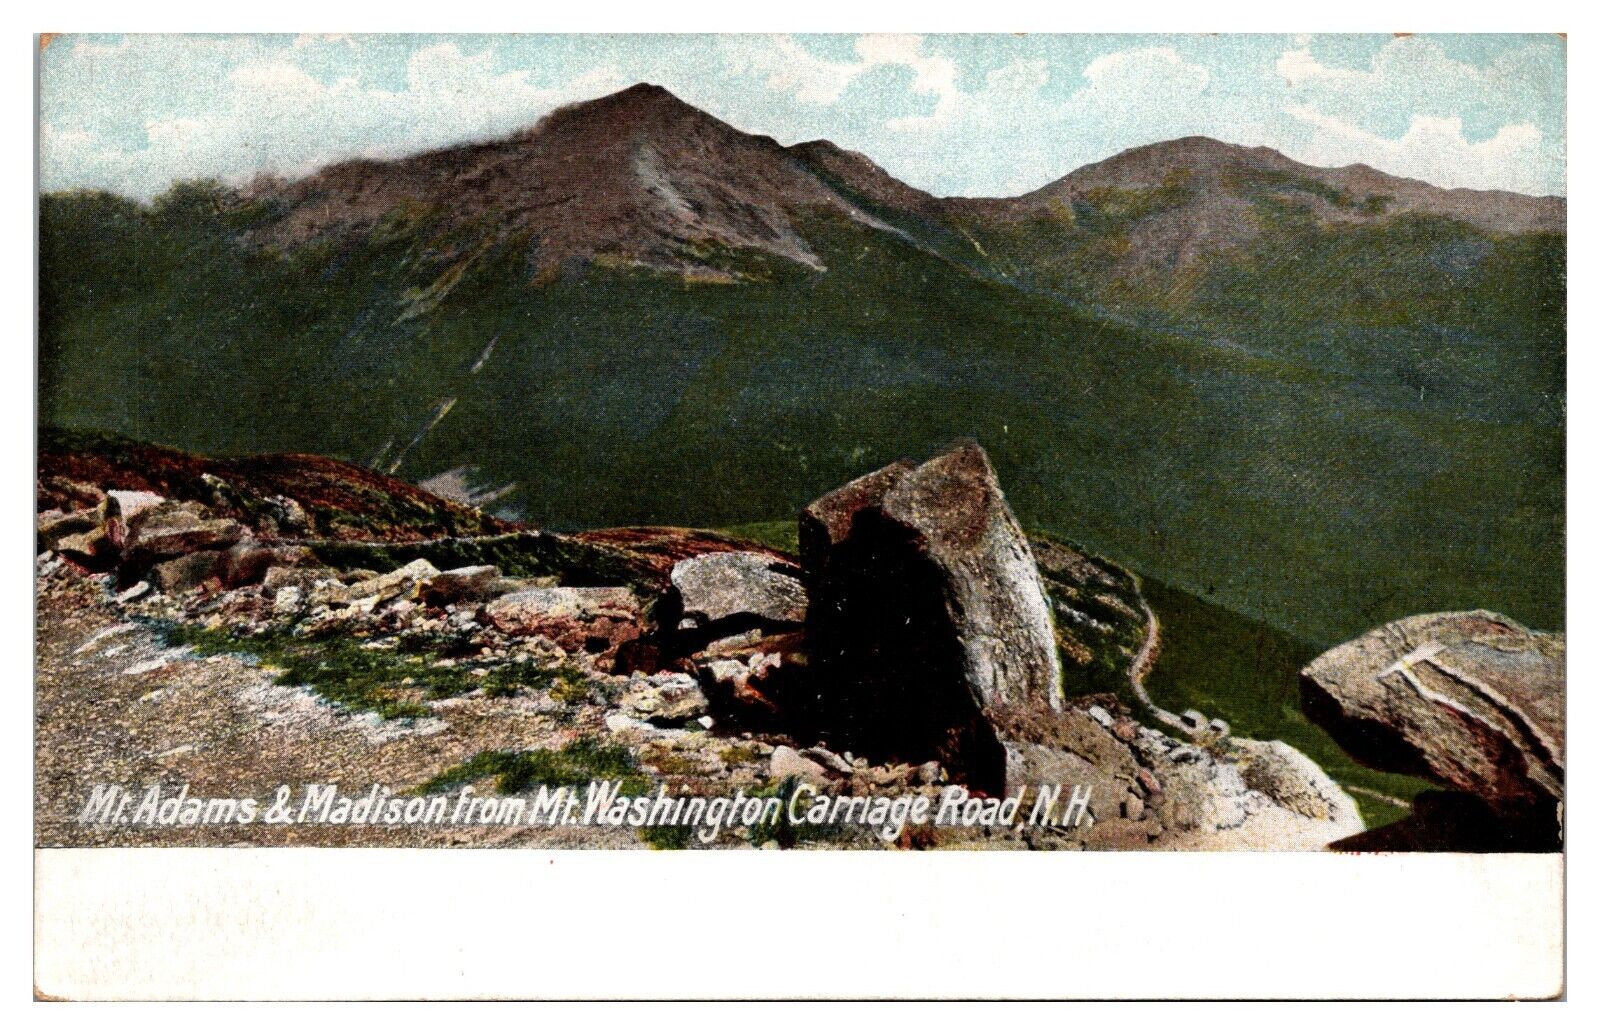 ANTQ Mt. Adams and Madison from Mt. Washington Carriage Road, NH Postcard 